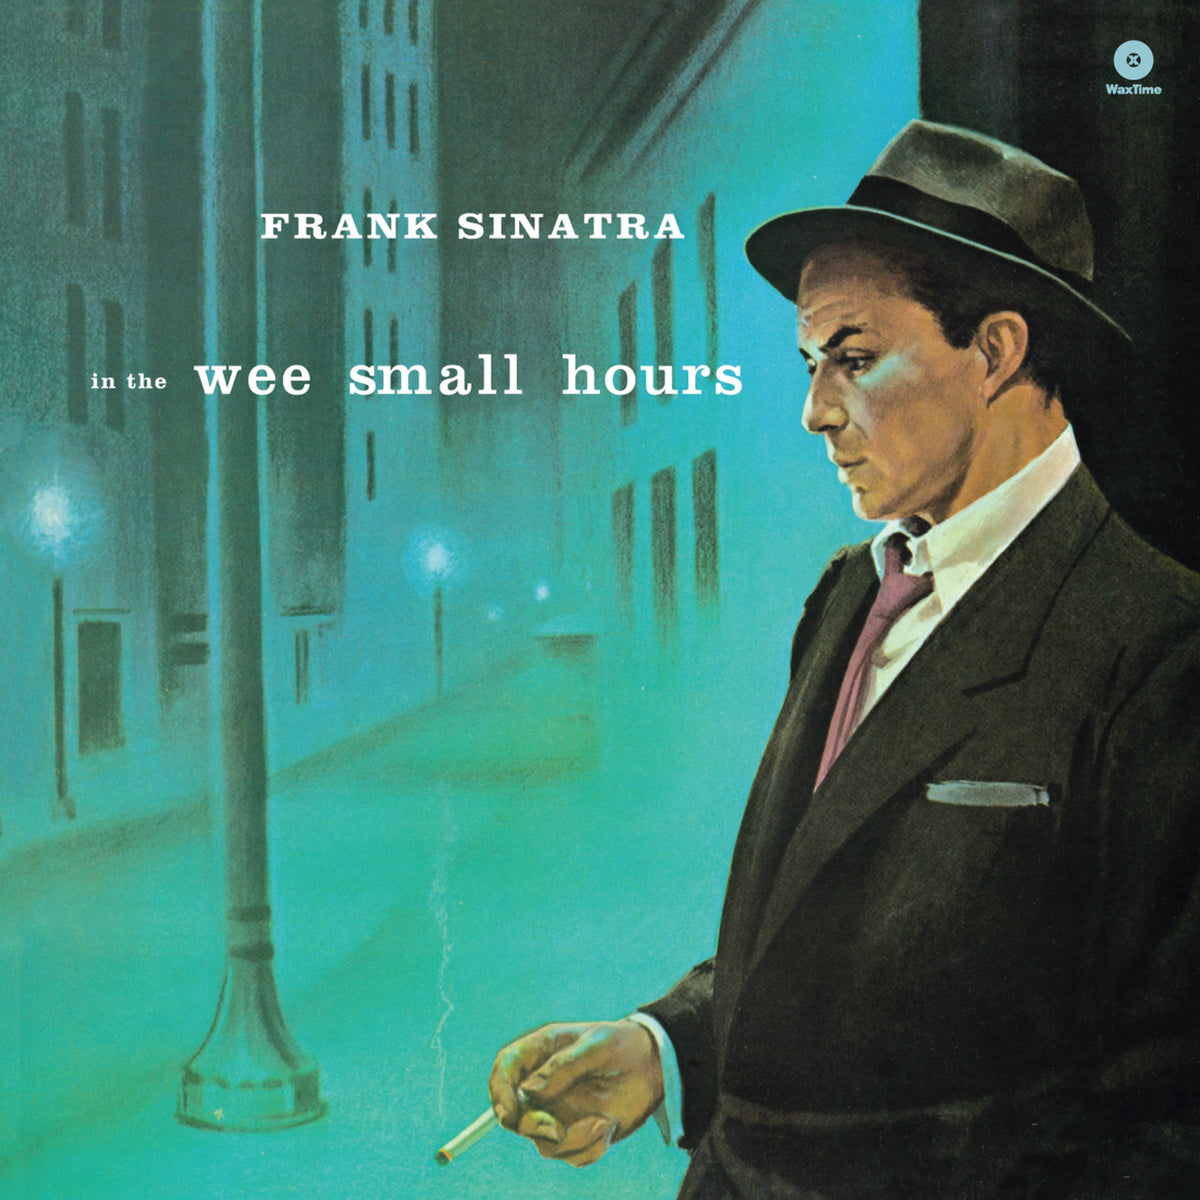 Frank Sinatra - In the Wee Small Hours - 771771